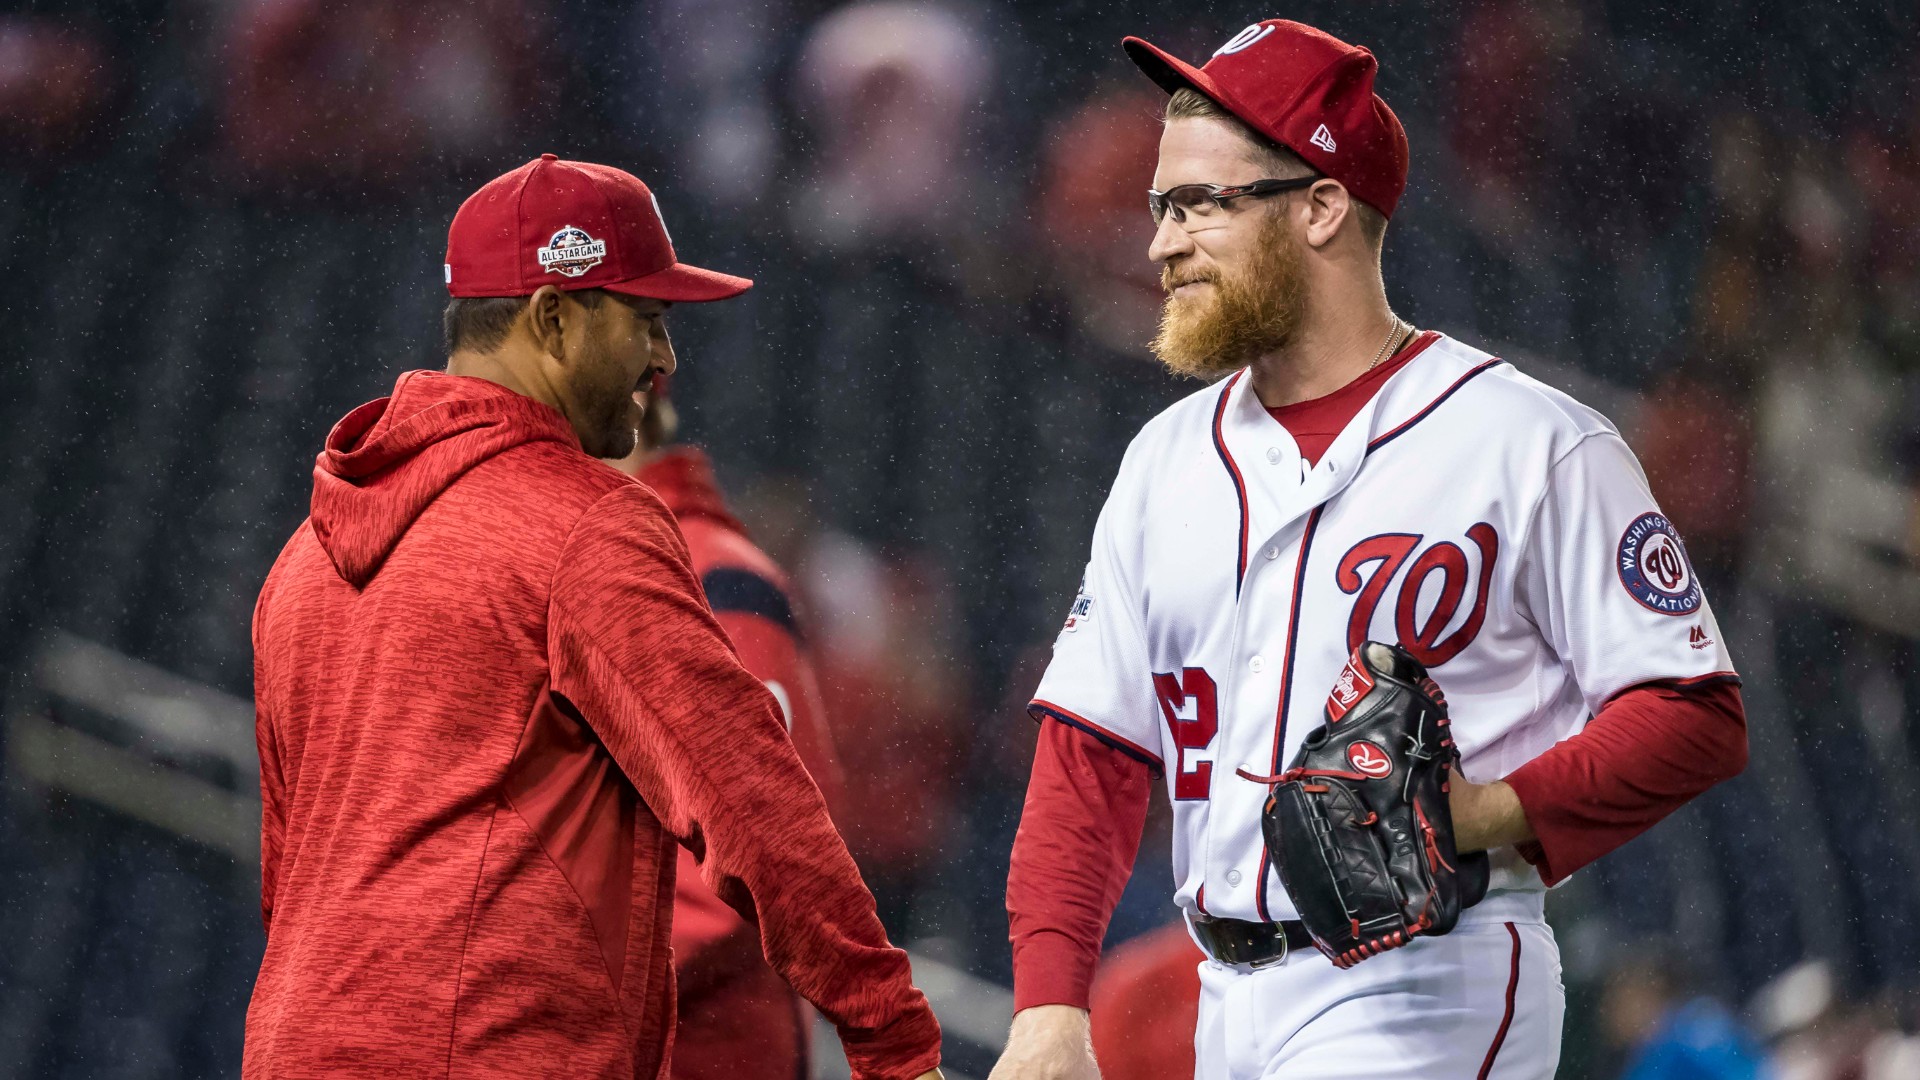 Sean Doolittle Thinks Davey Martinez Is a ‘Selling Point' for Free Agents